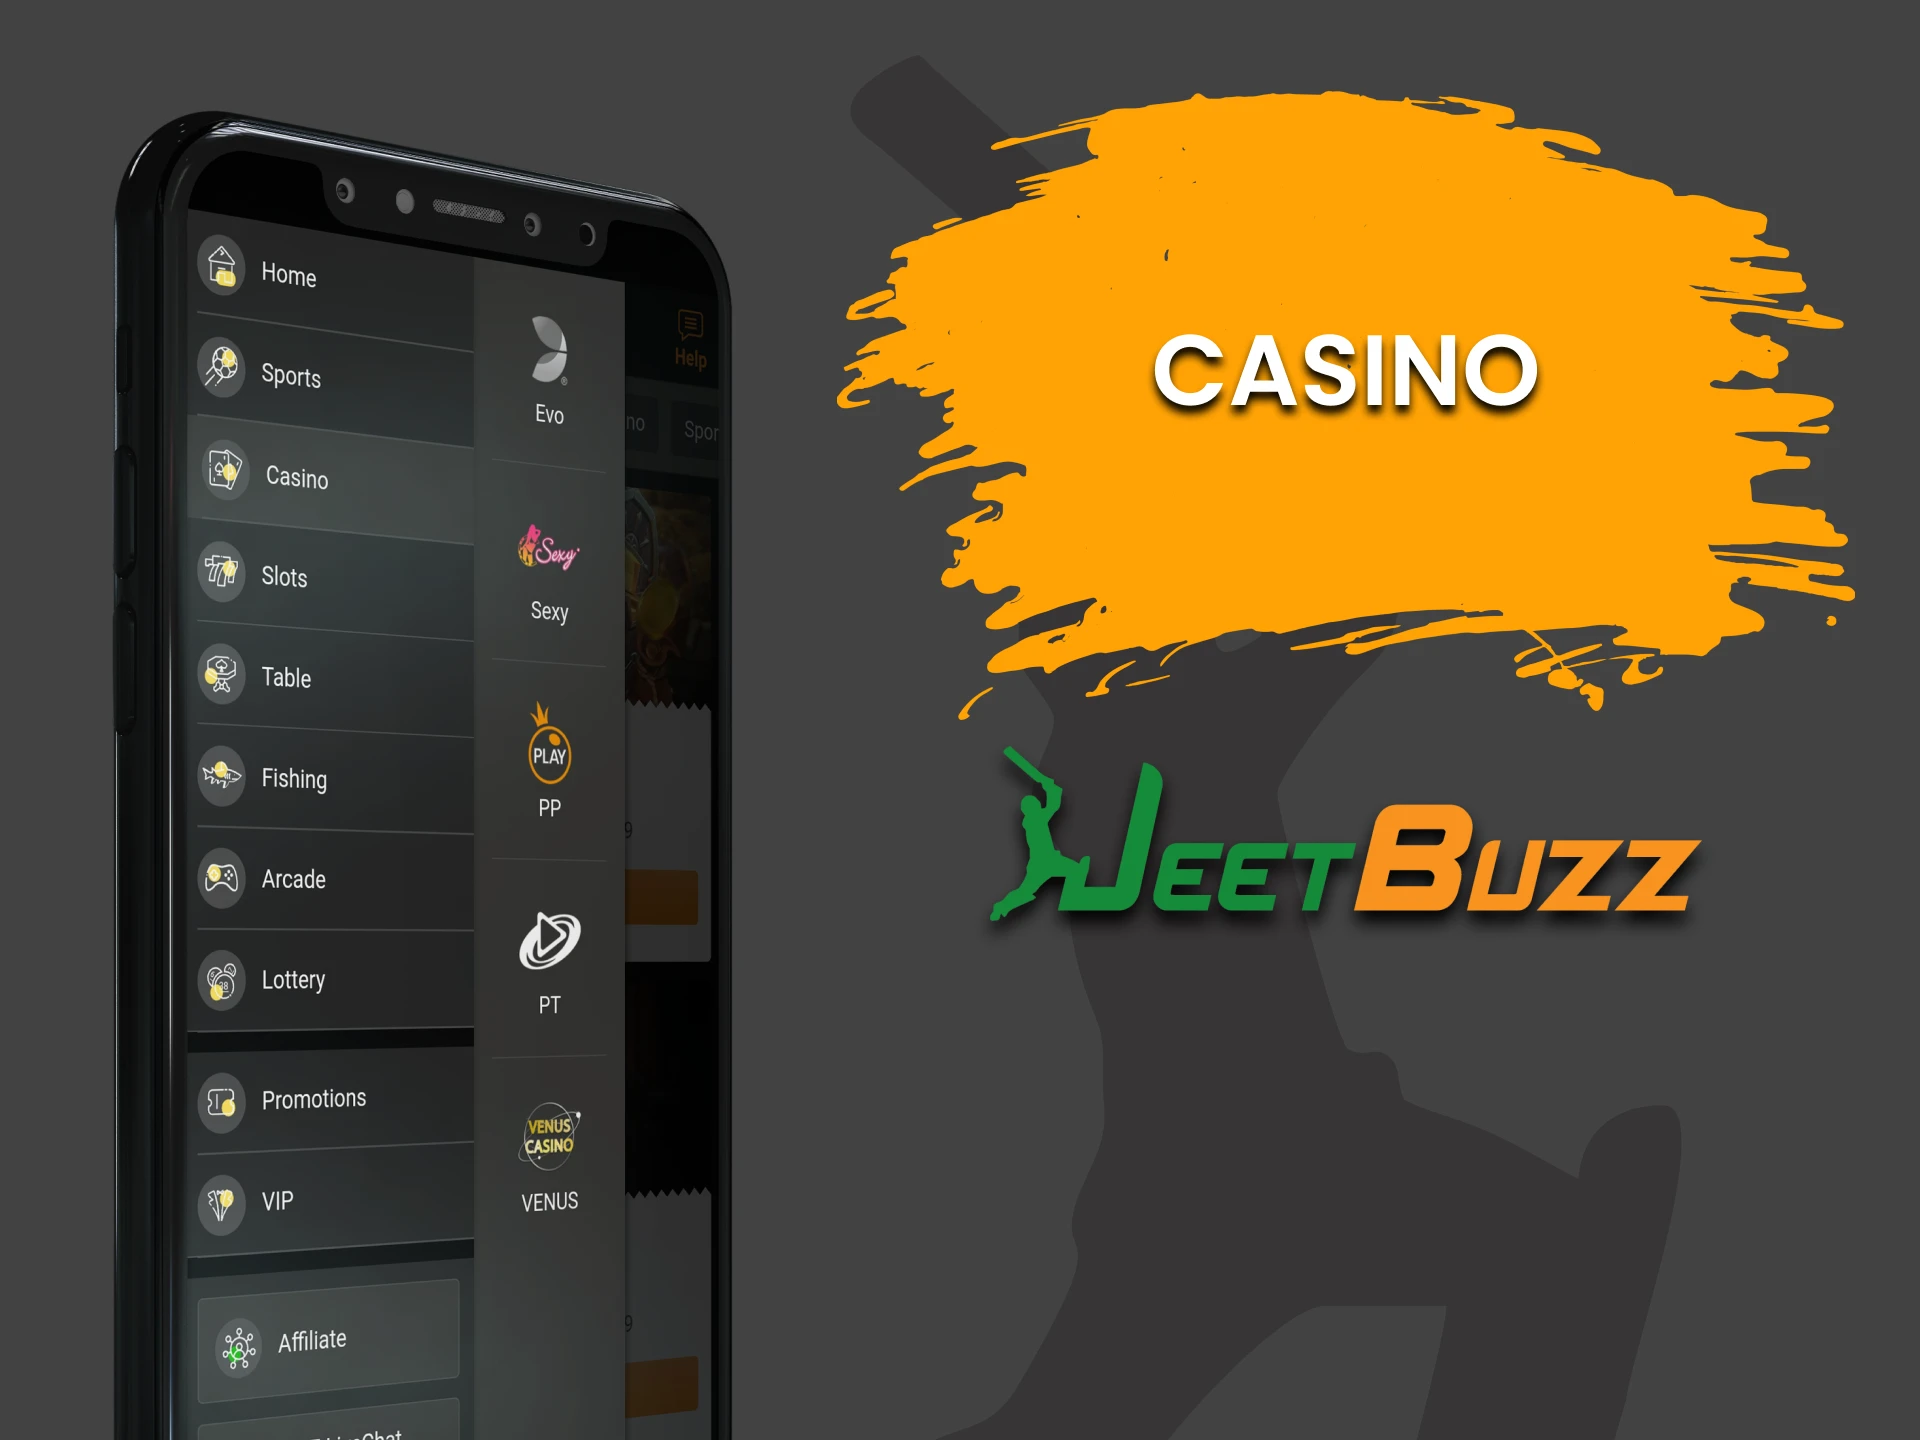 For casino games, choose the JeetBuzz app.